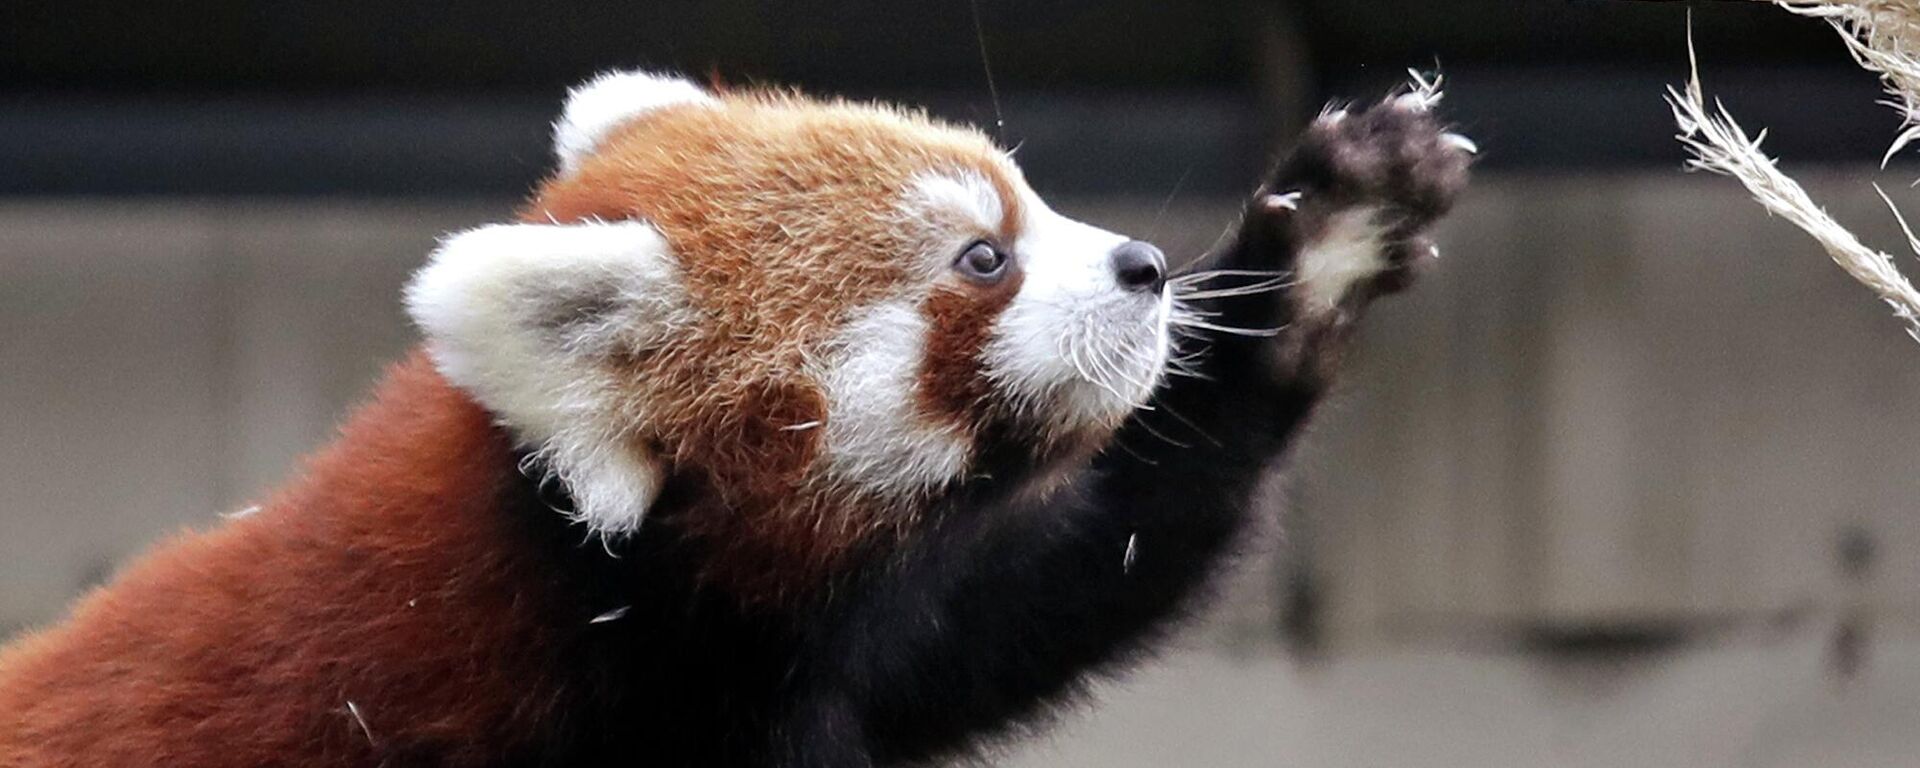 Red panda cub Ila extends her claws as she reaches toward a plant in a temporary outdoor enclosure she shares with her sister and mother during a media preview of the animals at the Woodland Park Zoo Wednesday, Nov. 14, 2018, in Seattle. - Sputnik International, 1920, 11.10.2022